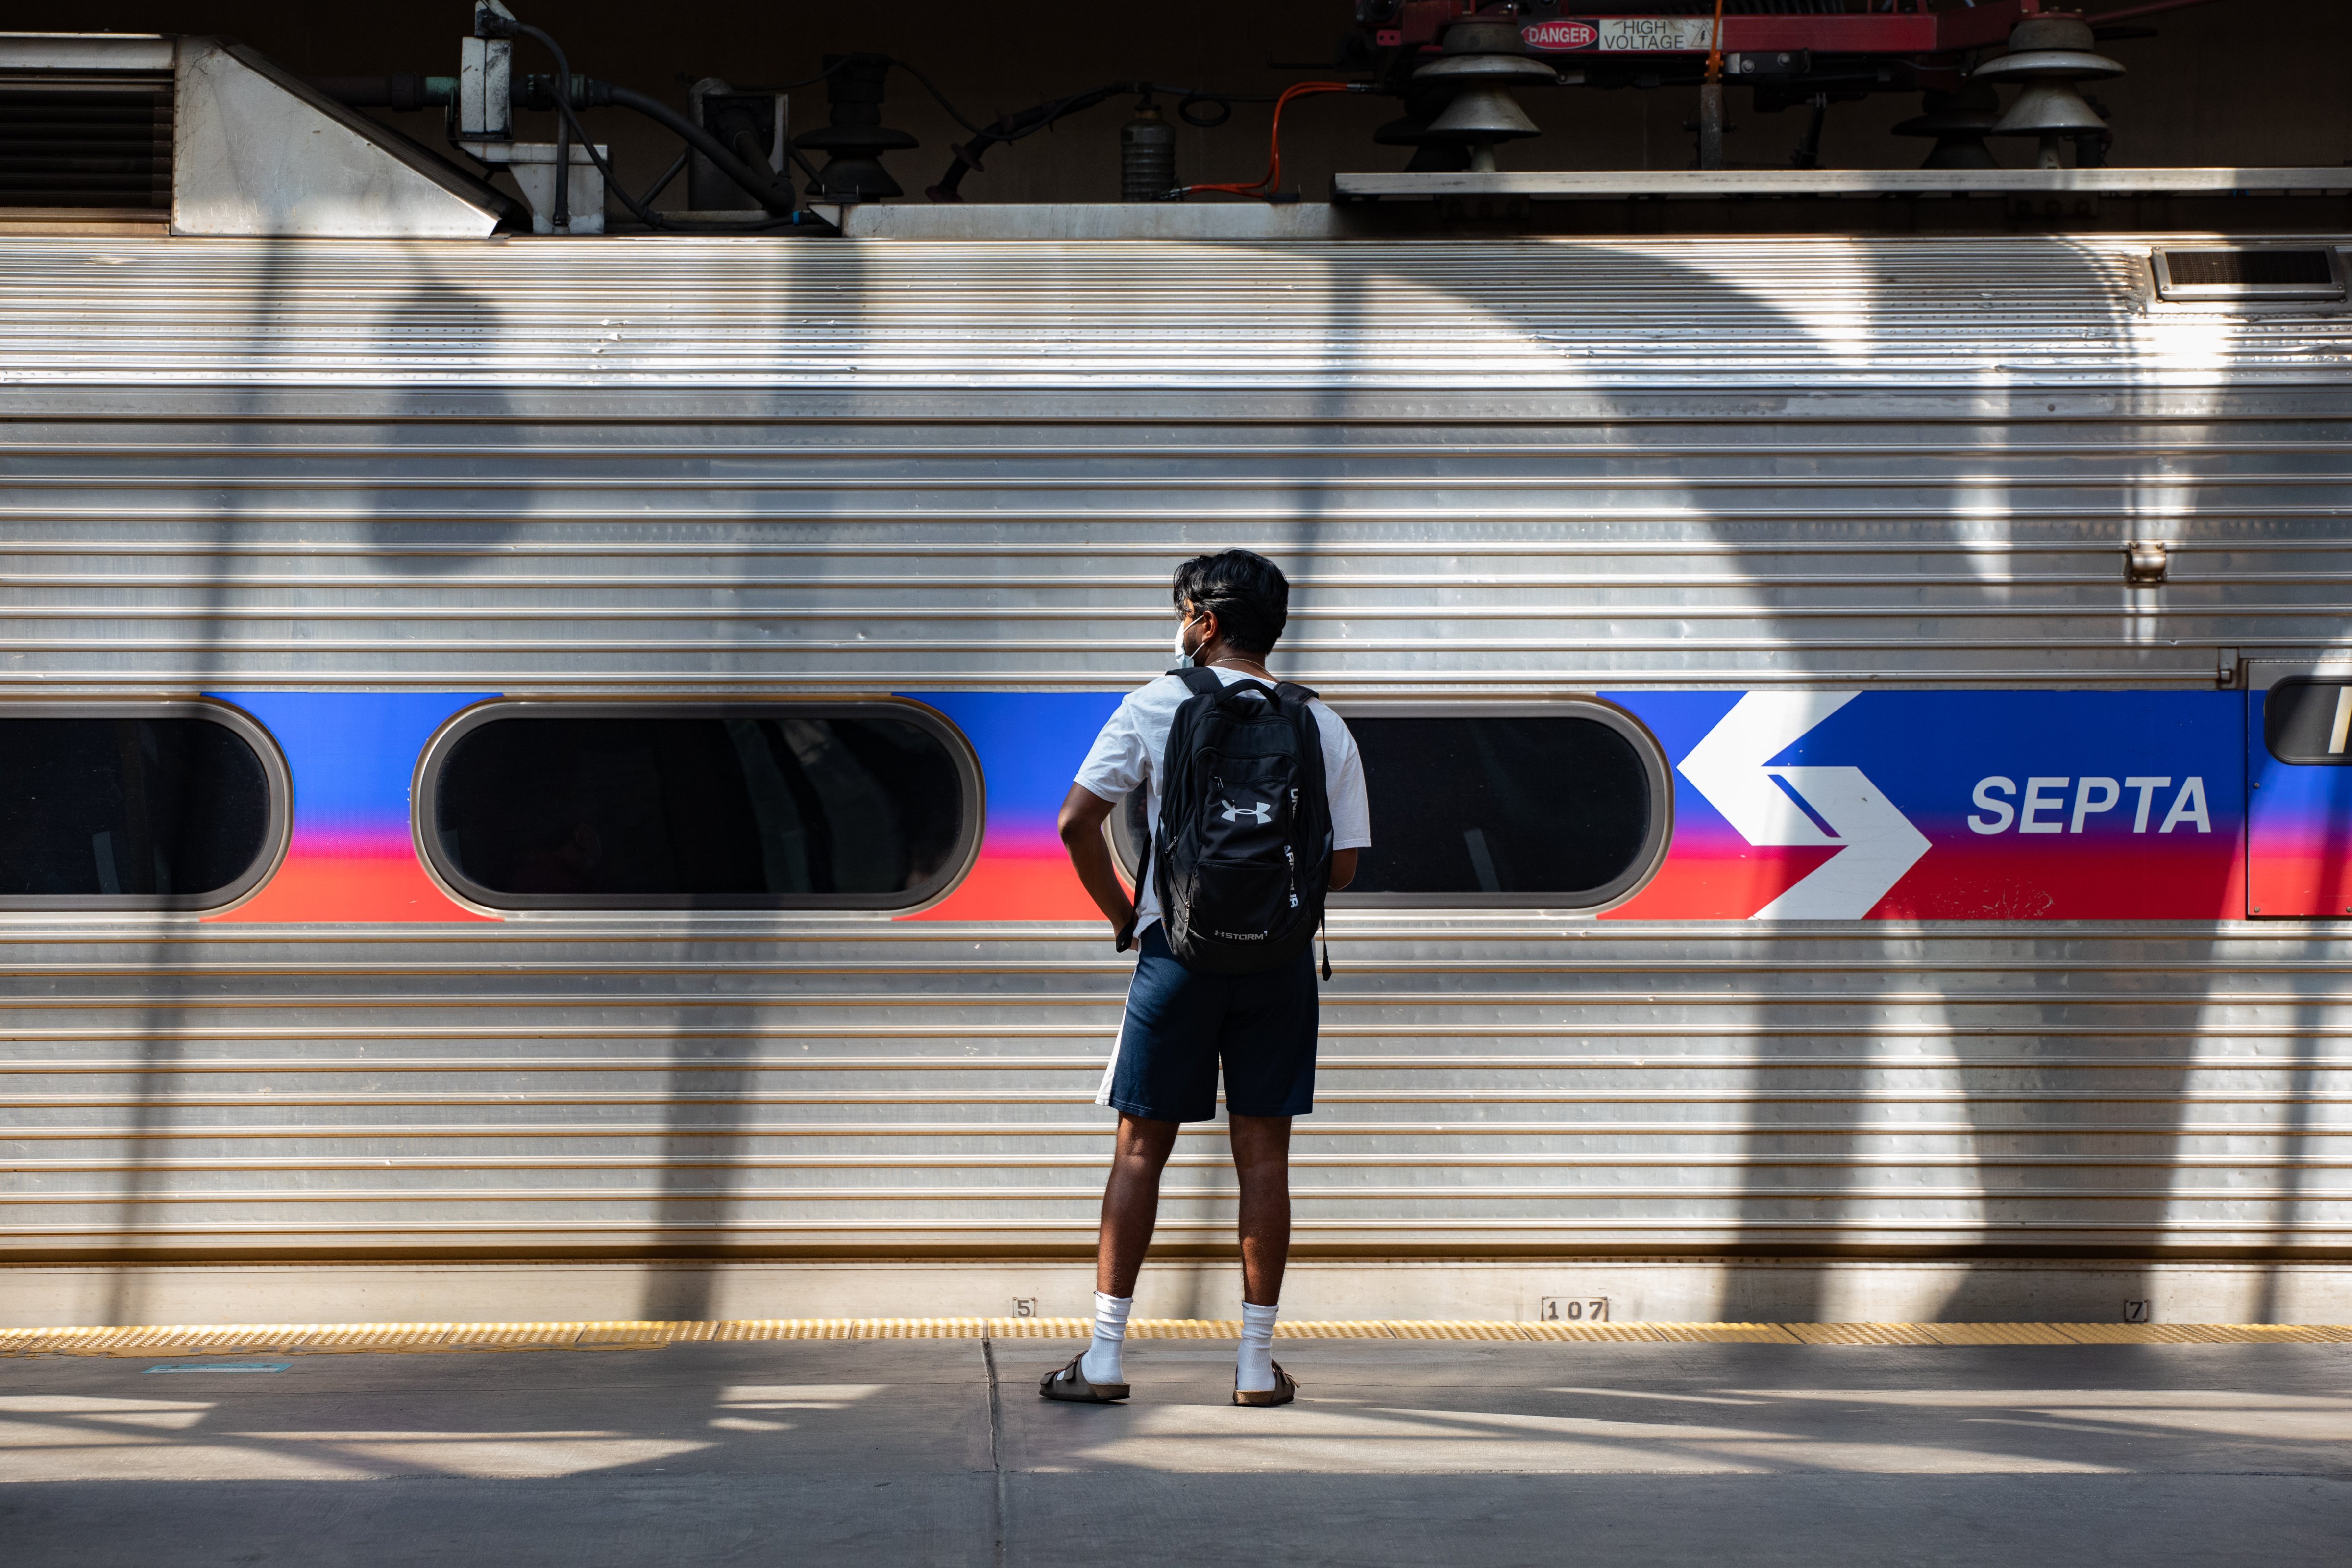 A passenger waits on a SEPTA train platform at a commuter rail station in Philadelphia on July 30, 2021. (Hannah Beier—Bloomberg/Getty Images)